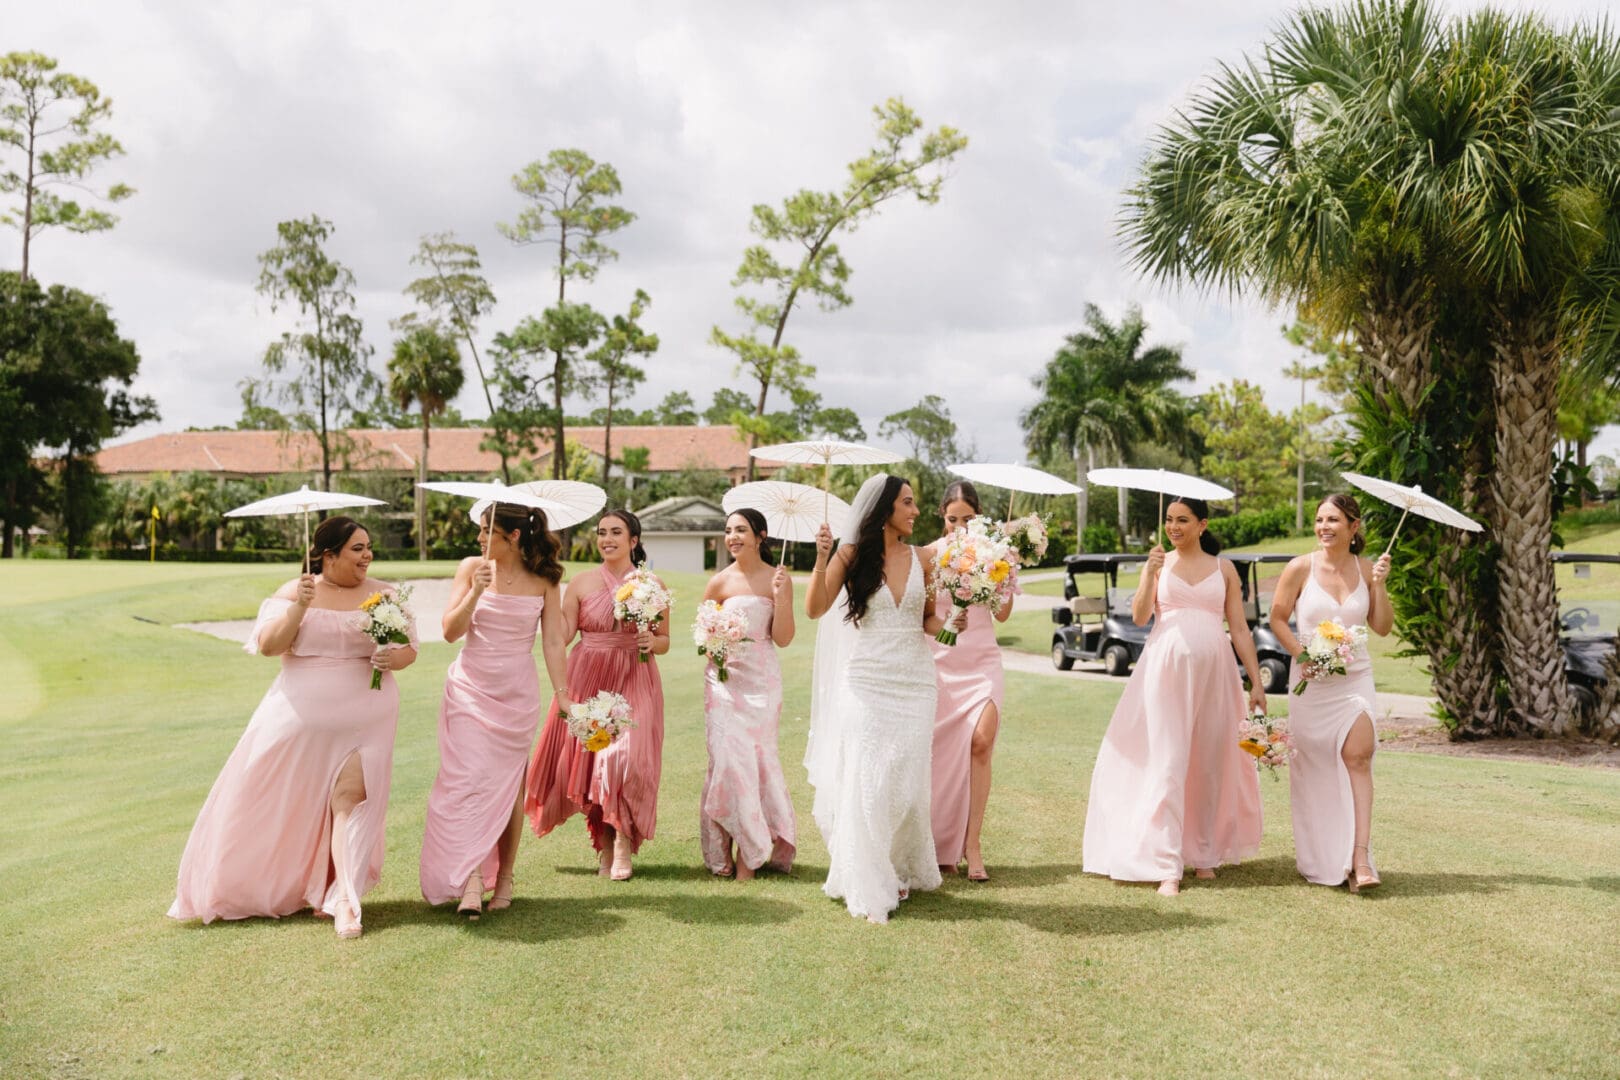 A group of women in pink dresses on the grass.